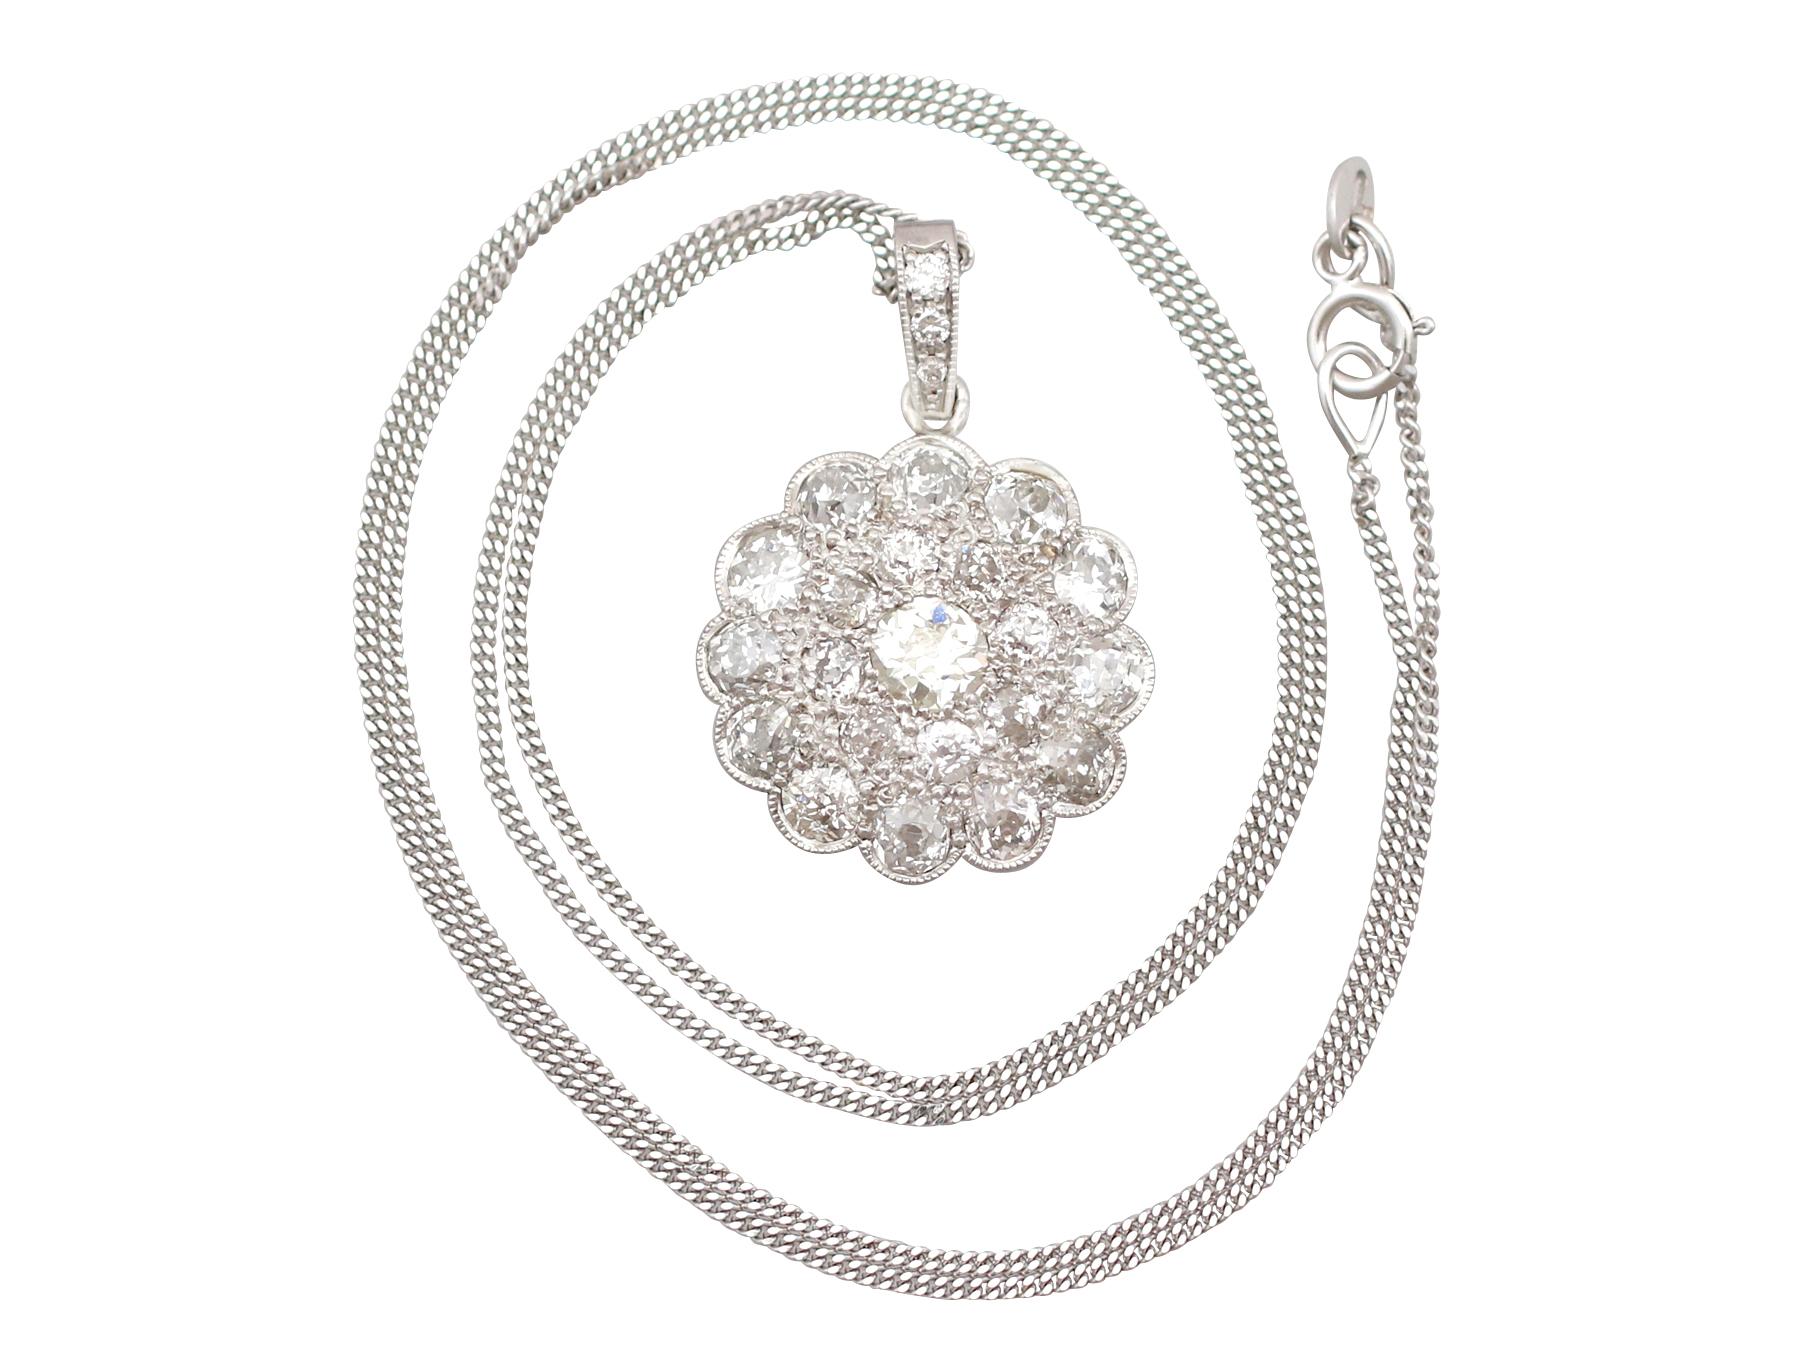 An impressive antique 1930s 2.05 Ct diamond and 18k white gold cluster pendant; part of our diverse antique jewelry and estate jewelry collections.

This stunning, fine and impressive antique cluster pendant has been crafted in 18k white gold.

The